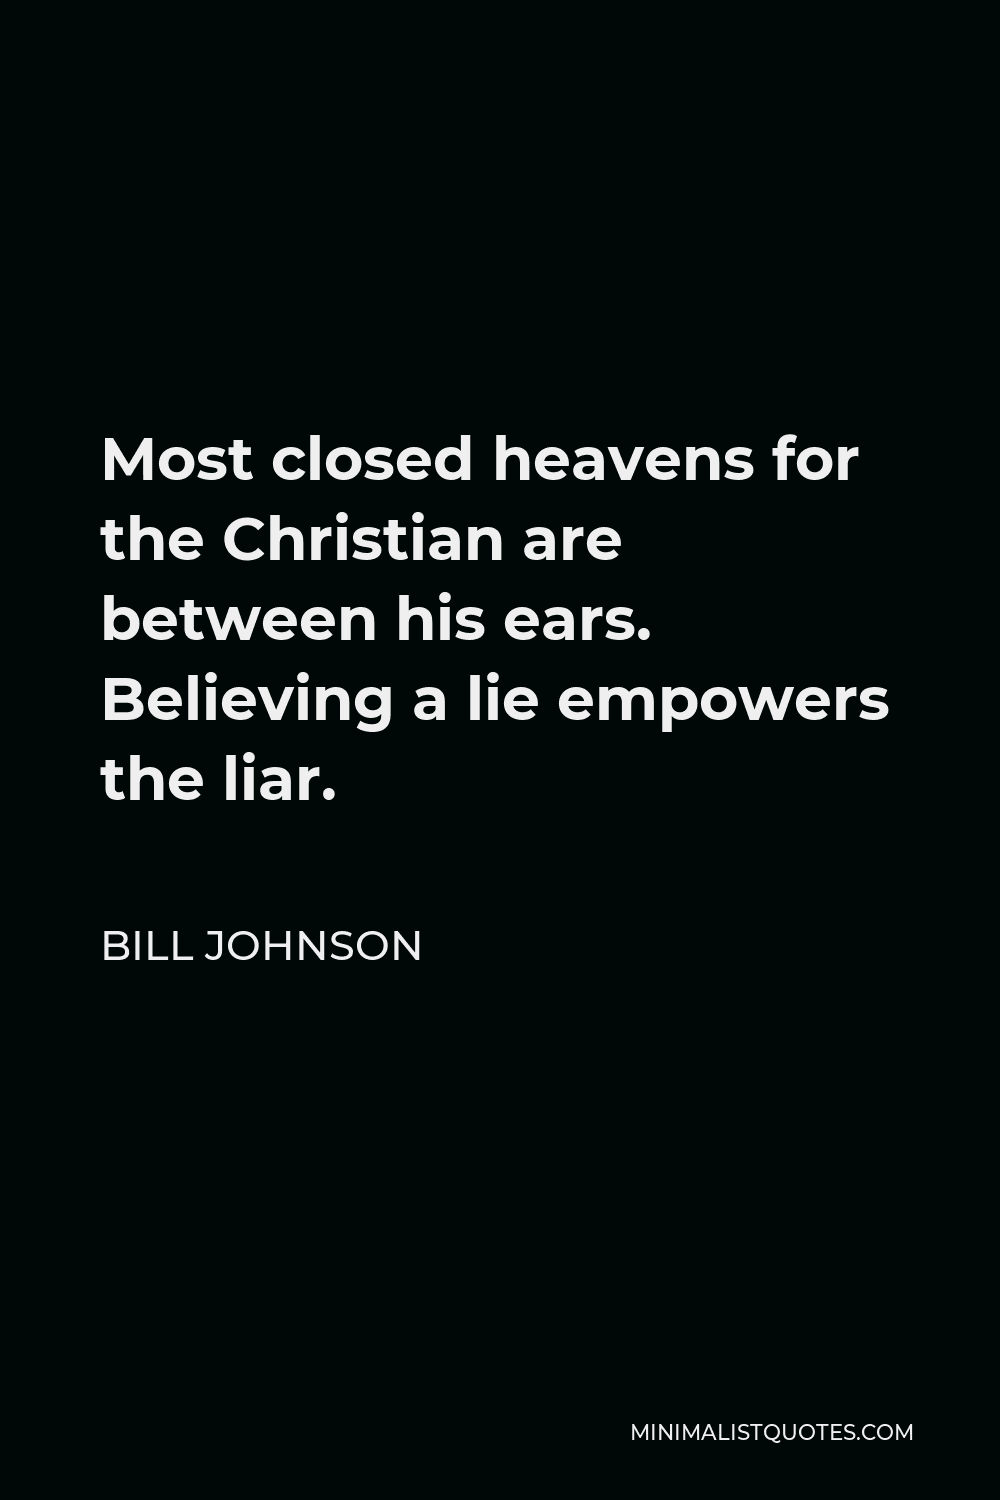 Bill Johnson Quote - Most closed heavens for the Christian are between his ears. Believing a lie empowers the liar.